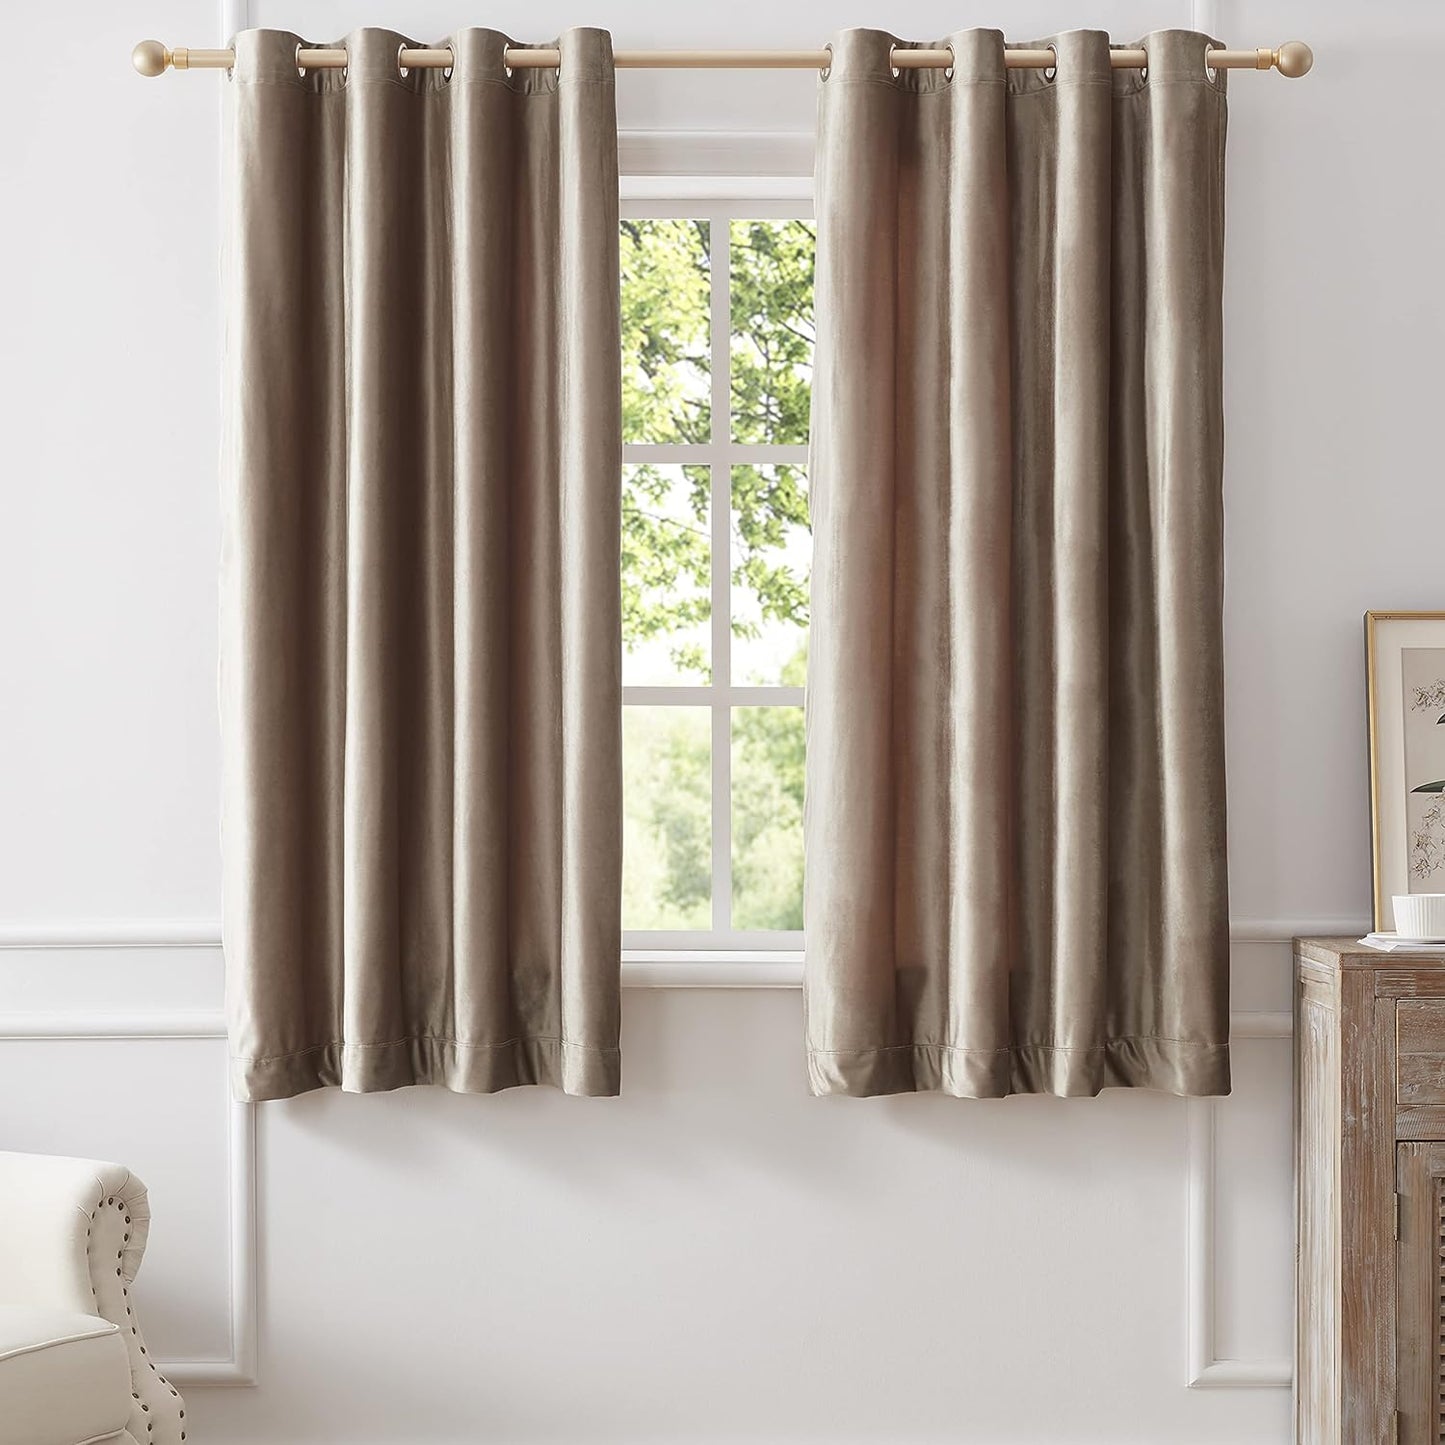 BULBUL Velvet Gold Curtains 84 Inch Length- Living Room Blackout Thermal Window Drapes Darkening Decor Grommet Curtains for Bedroom Set of 2 Panels  BULBUL Taupe 52"W X 63"L 